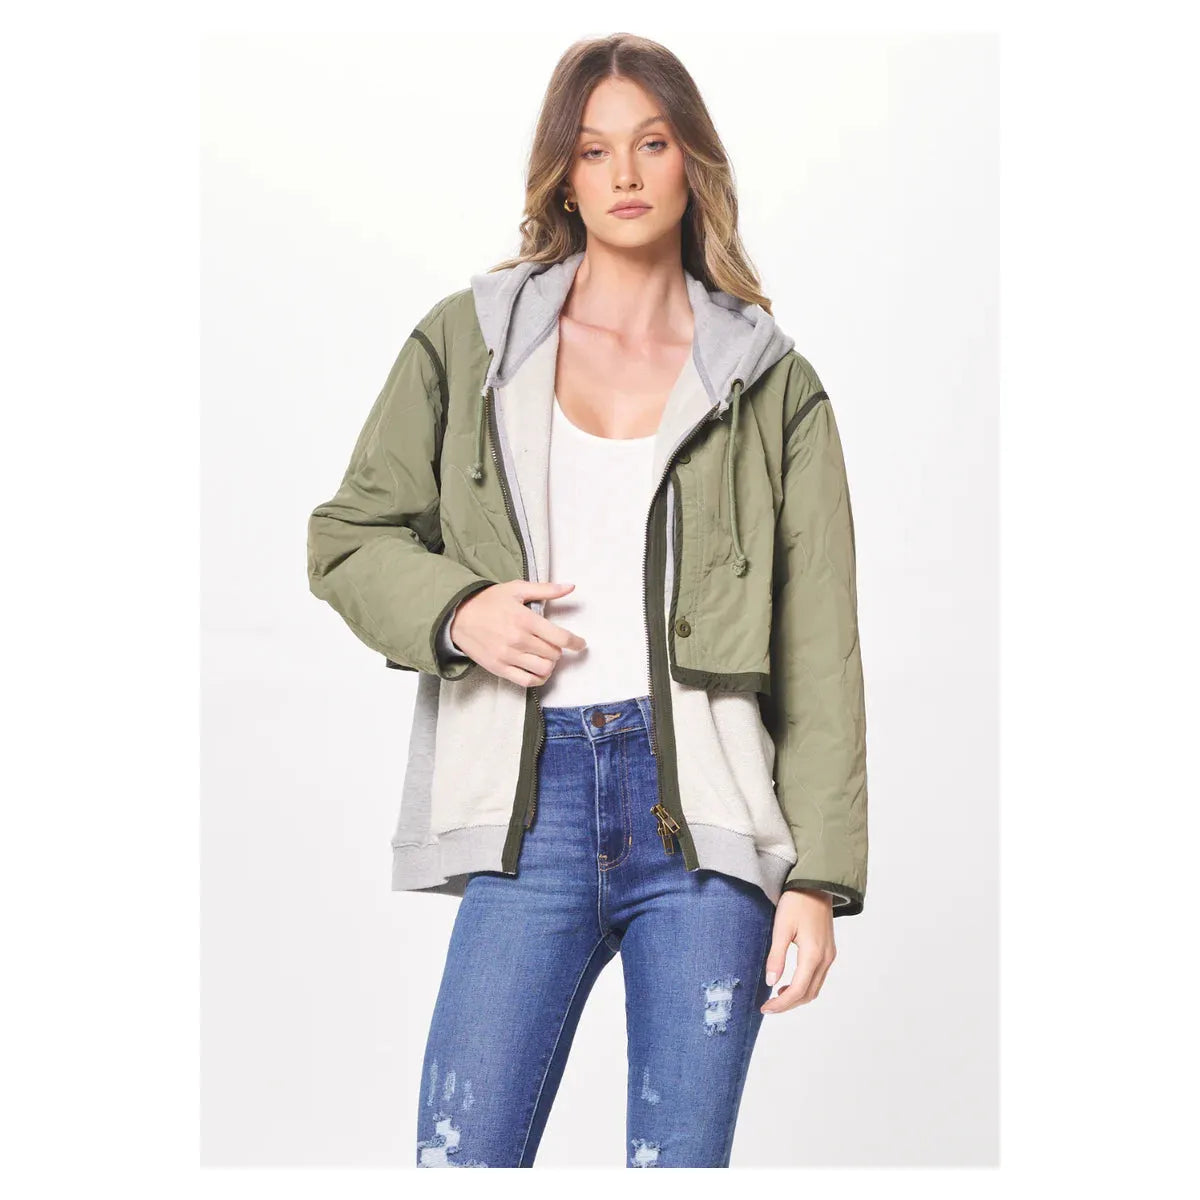 Heather Gray and Olive Combo Layered Jacket